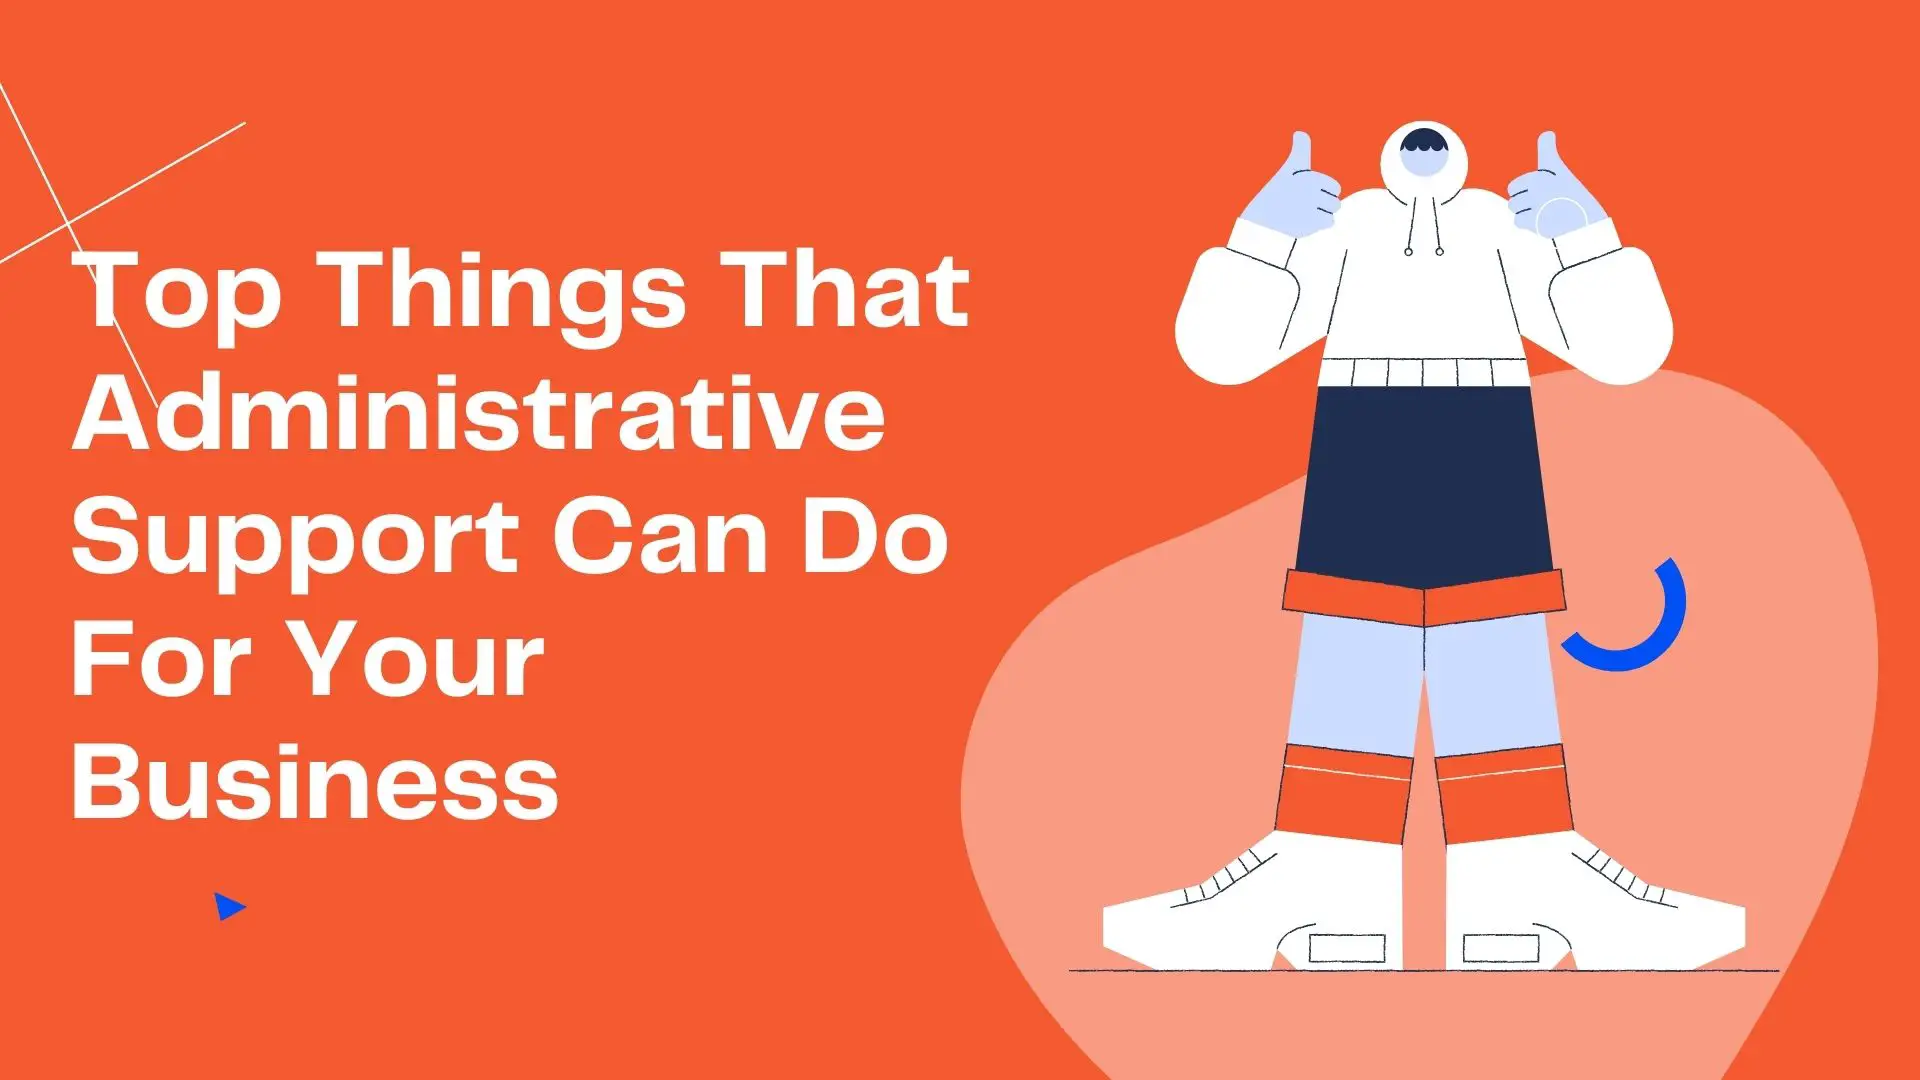 Top Things That Administrative Support Can Do For Your Business